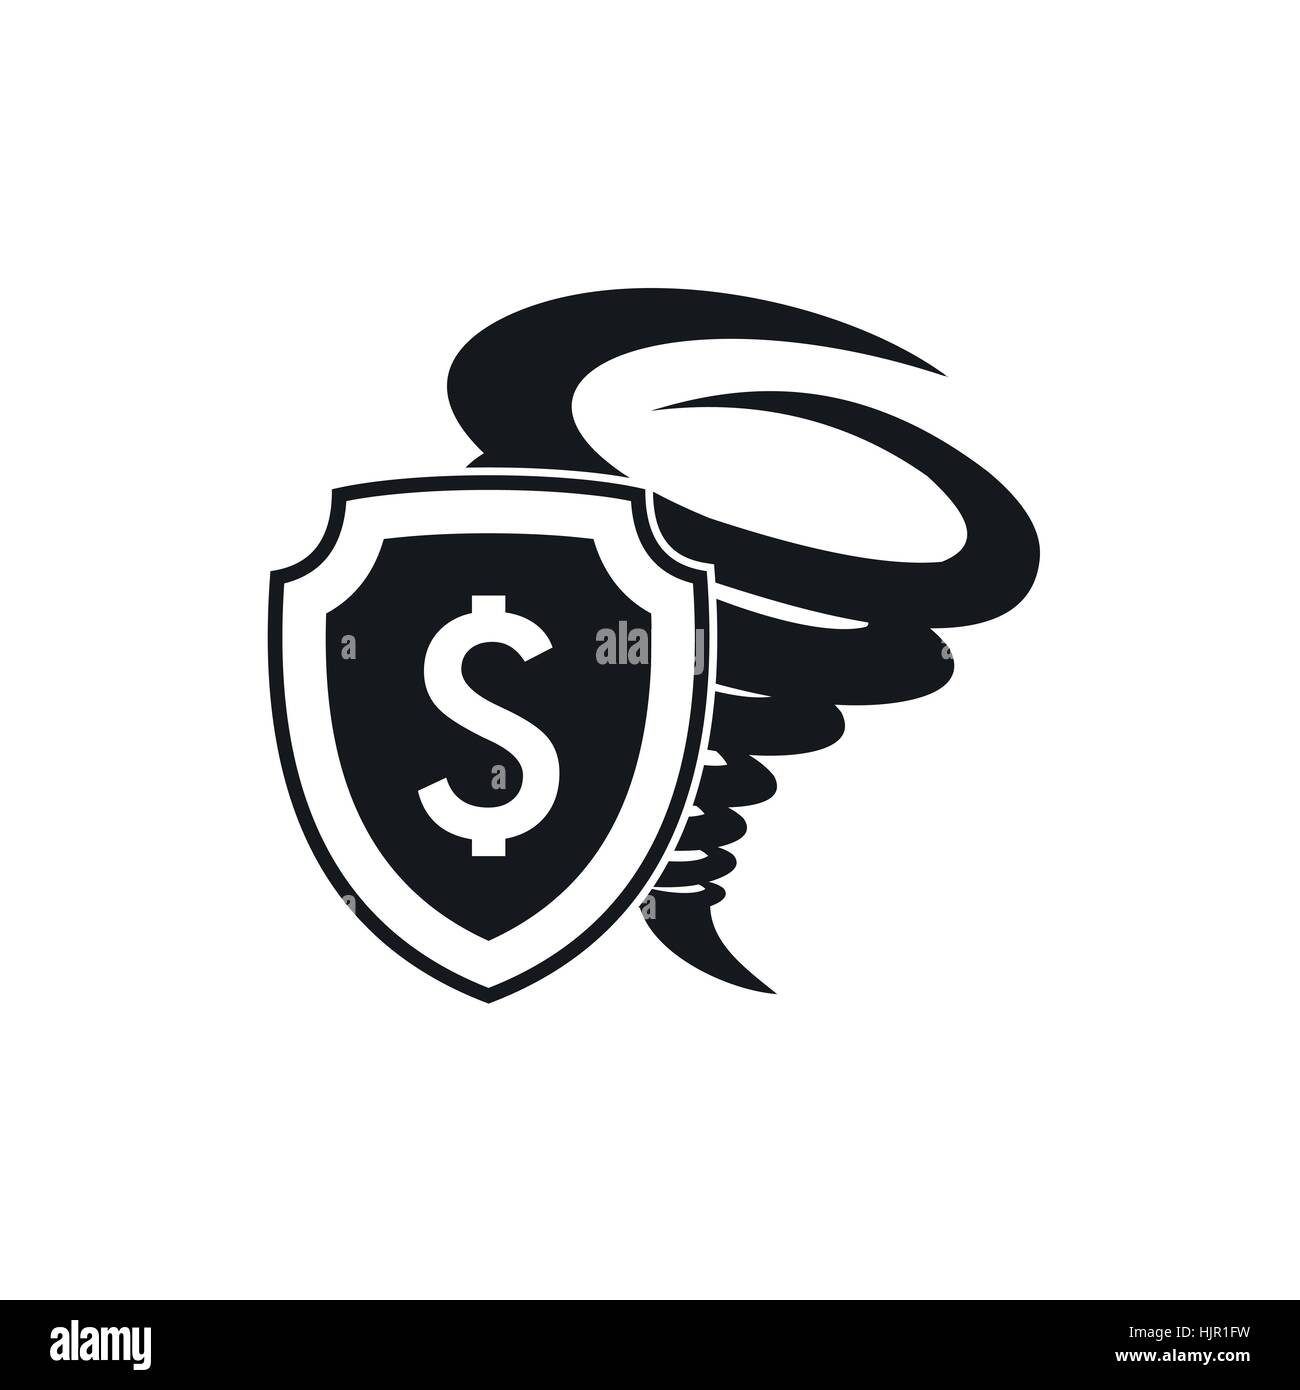 Hurricane insurance icon in simple style on a white background Stock Vector